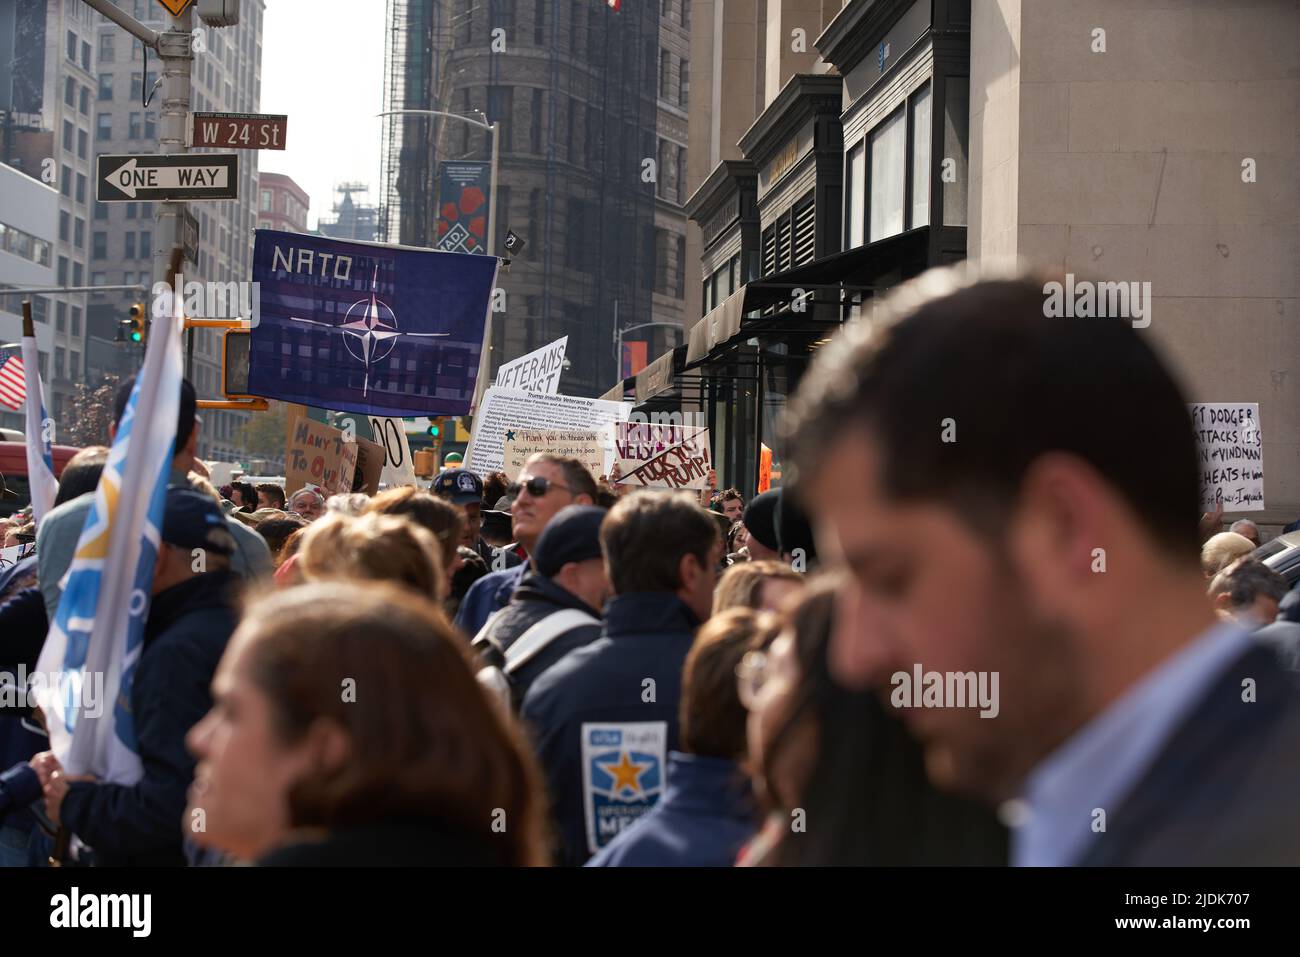 Manhattan, New York,USA - November 11. 2019: NATO flag and signs supporting Veterans during Veterans Day Parade in NYC Stock Photo